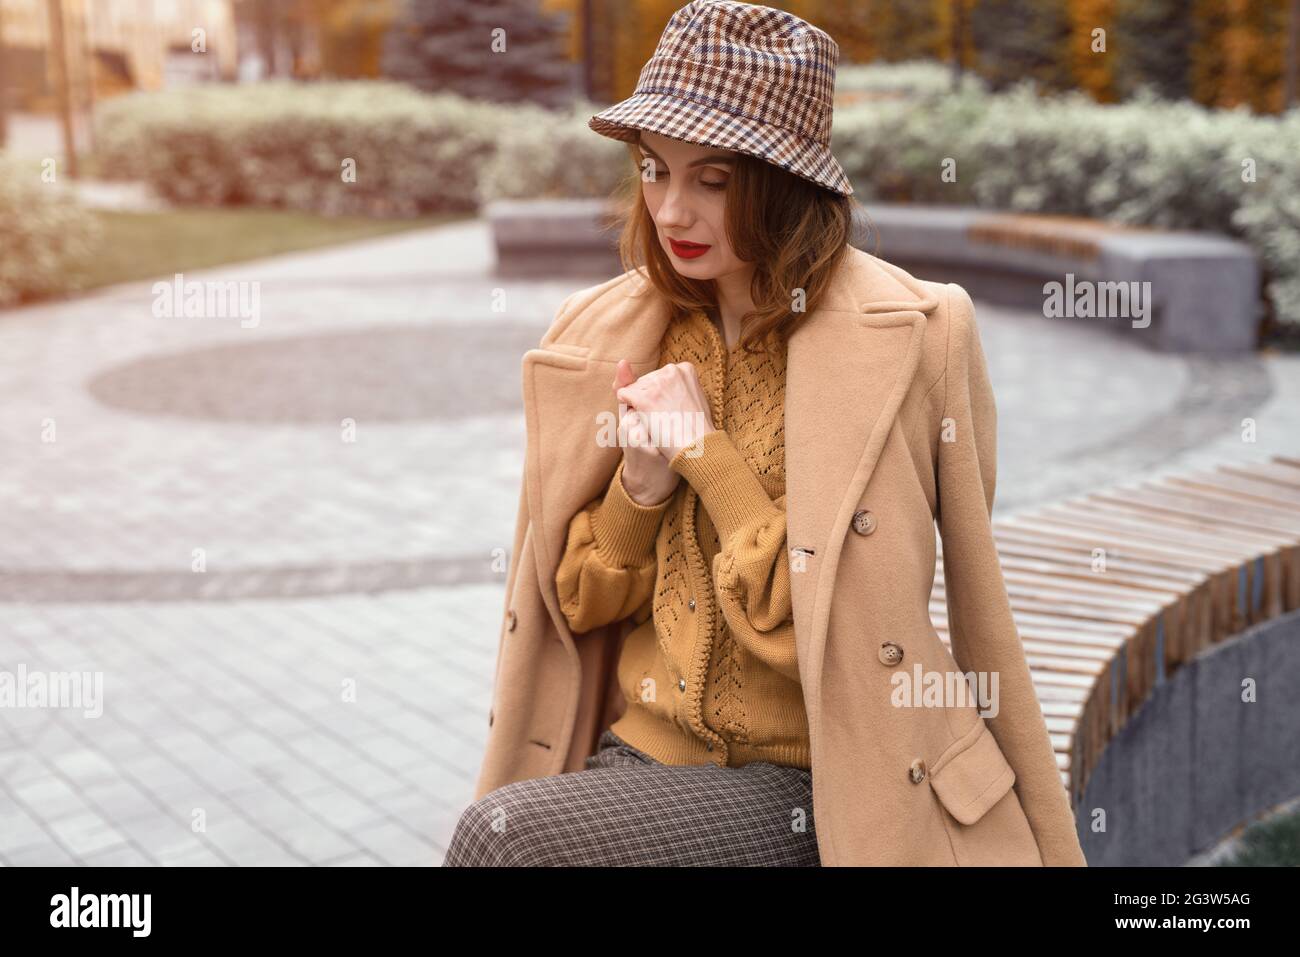 Parisian girl in beige coat and plaid panama hat siting on rounded bench waiting for her date or girlfriends. Autumn walk concep Stock Photo